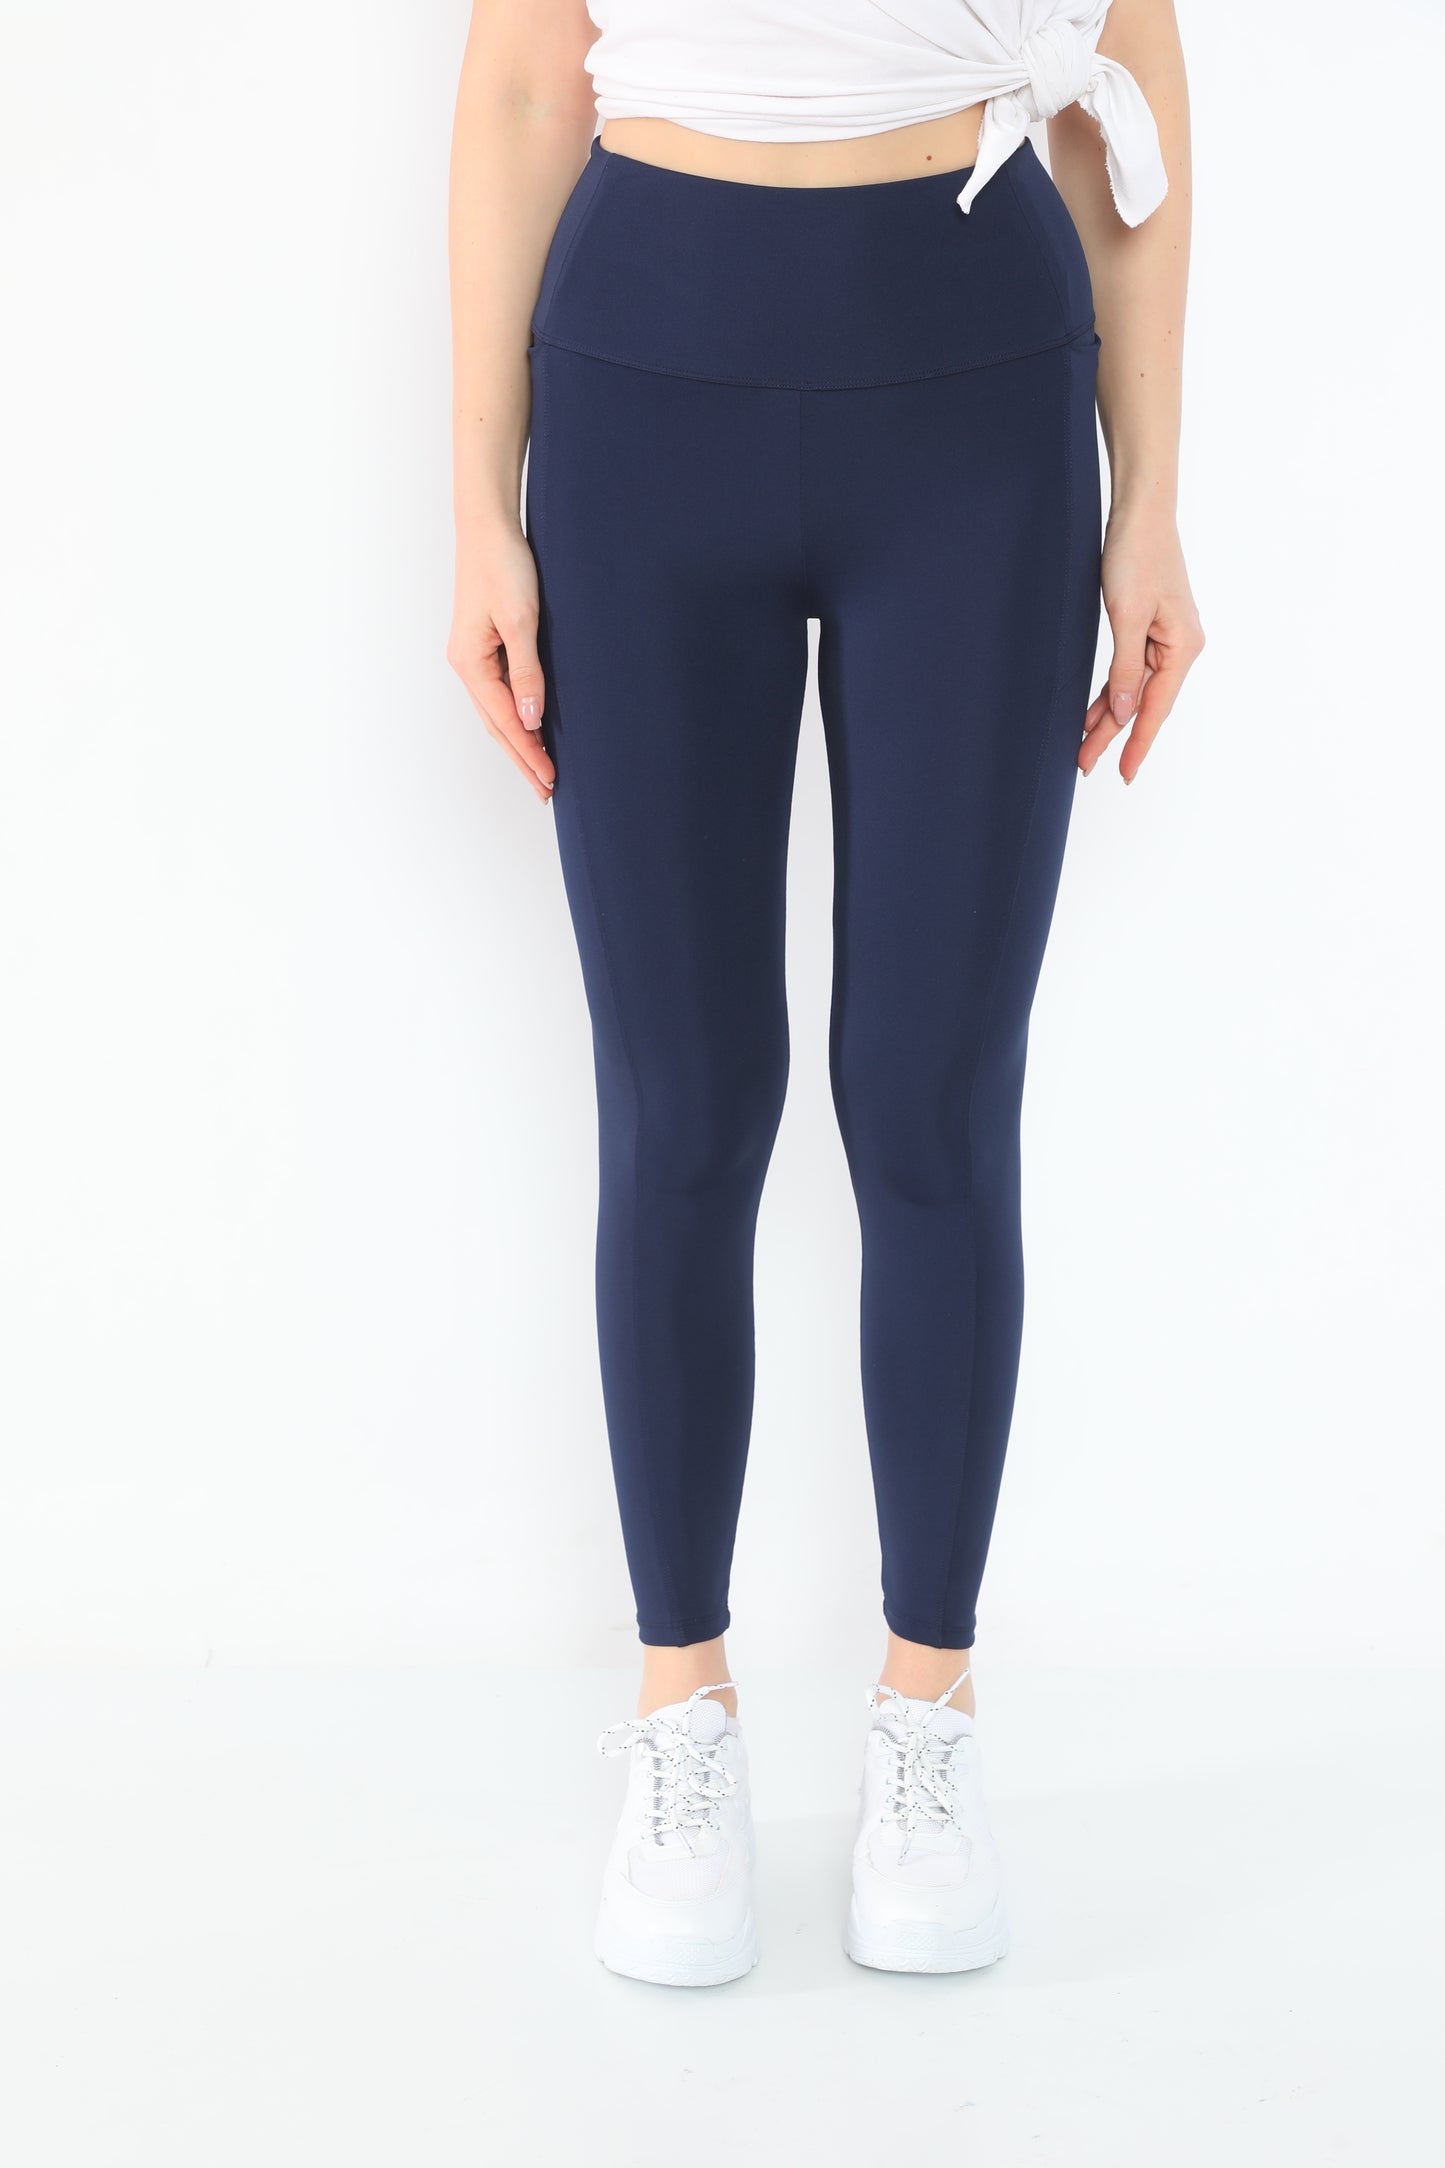 Leggings with Pockets Navy Blue